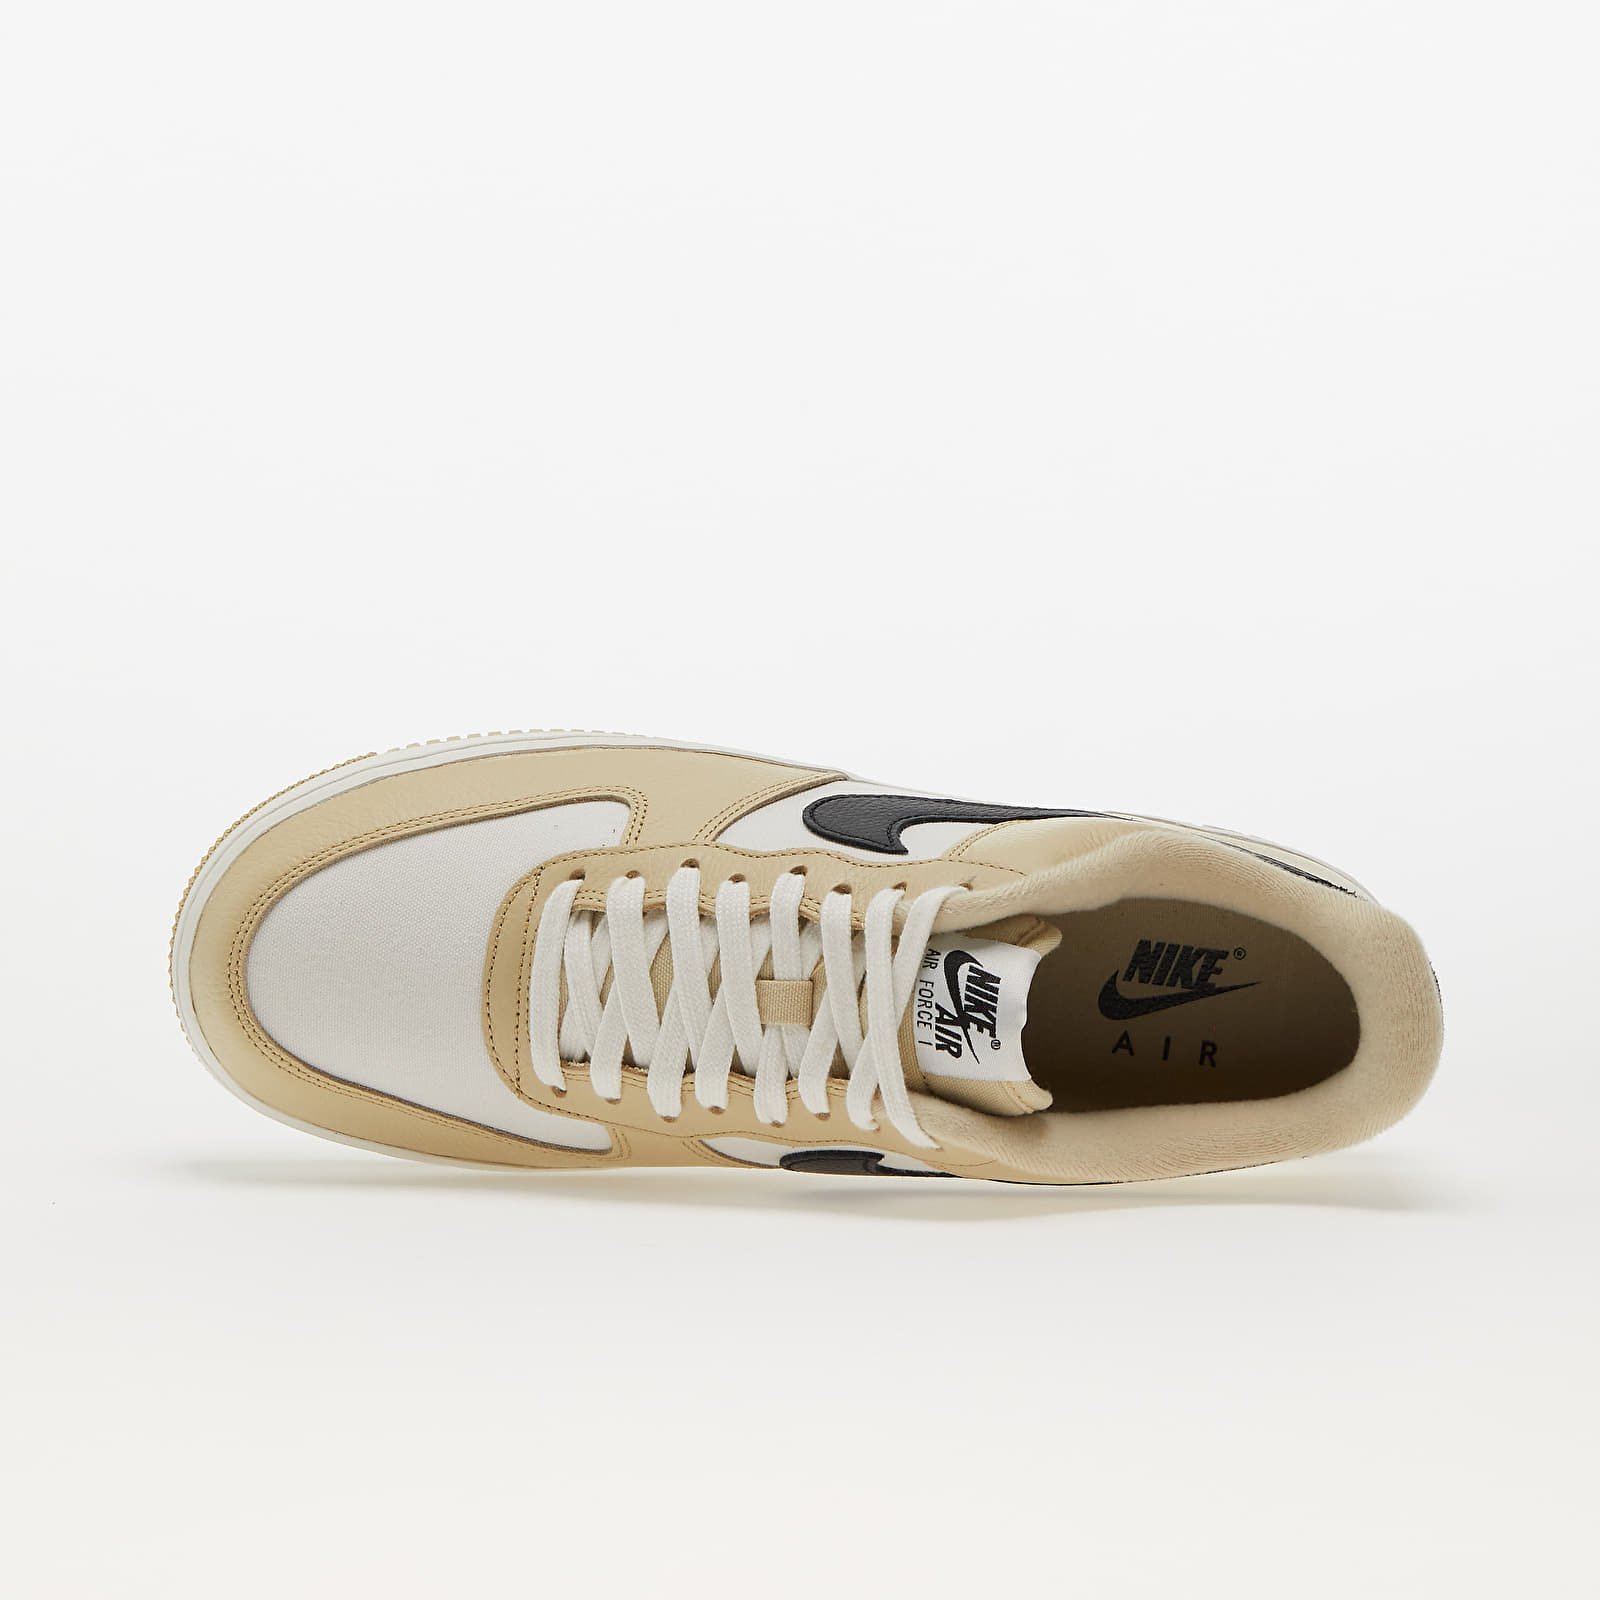 Air Force 1 '07 LX Low Team Gold